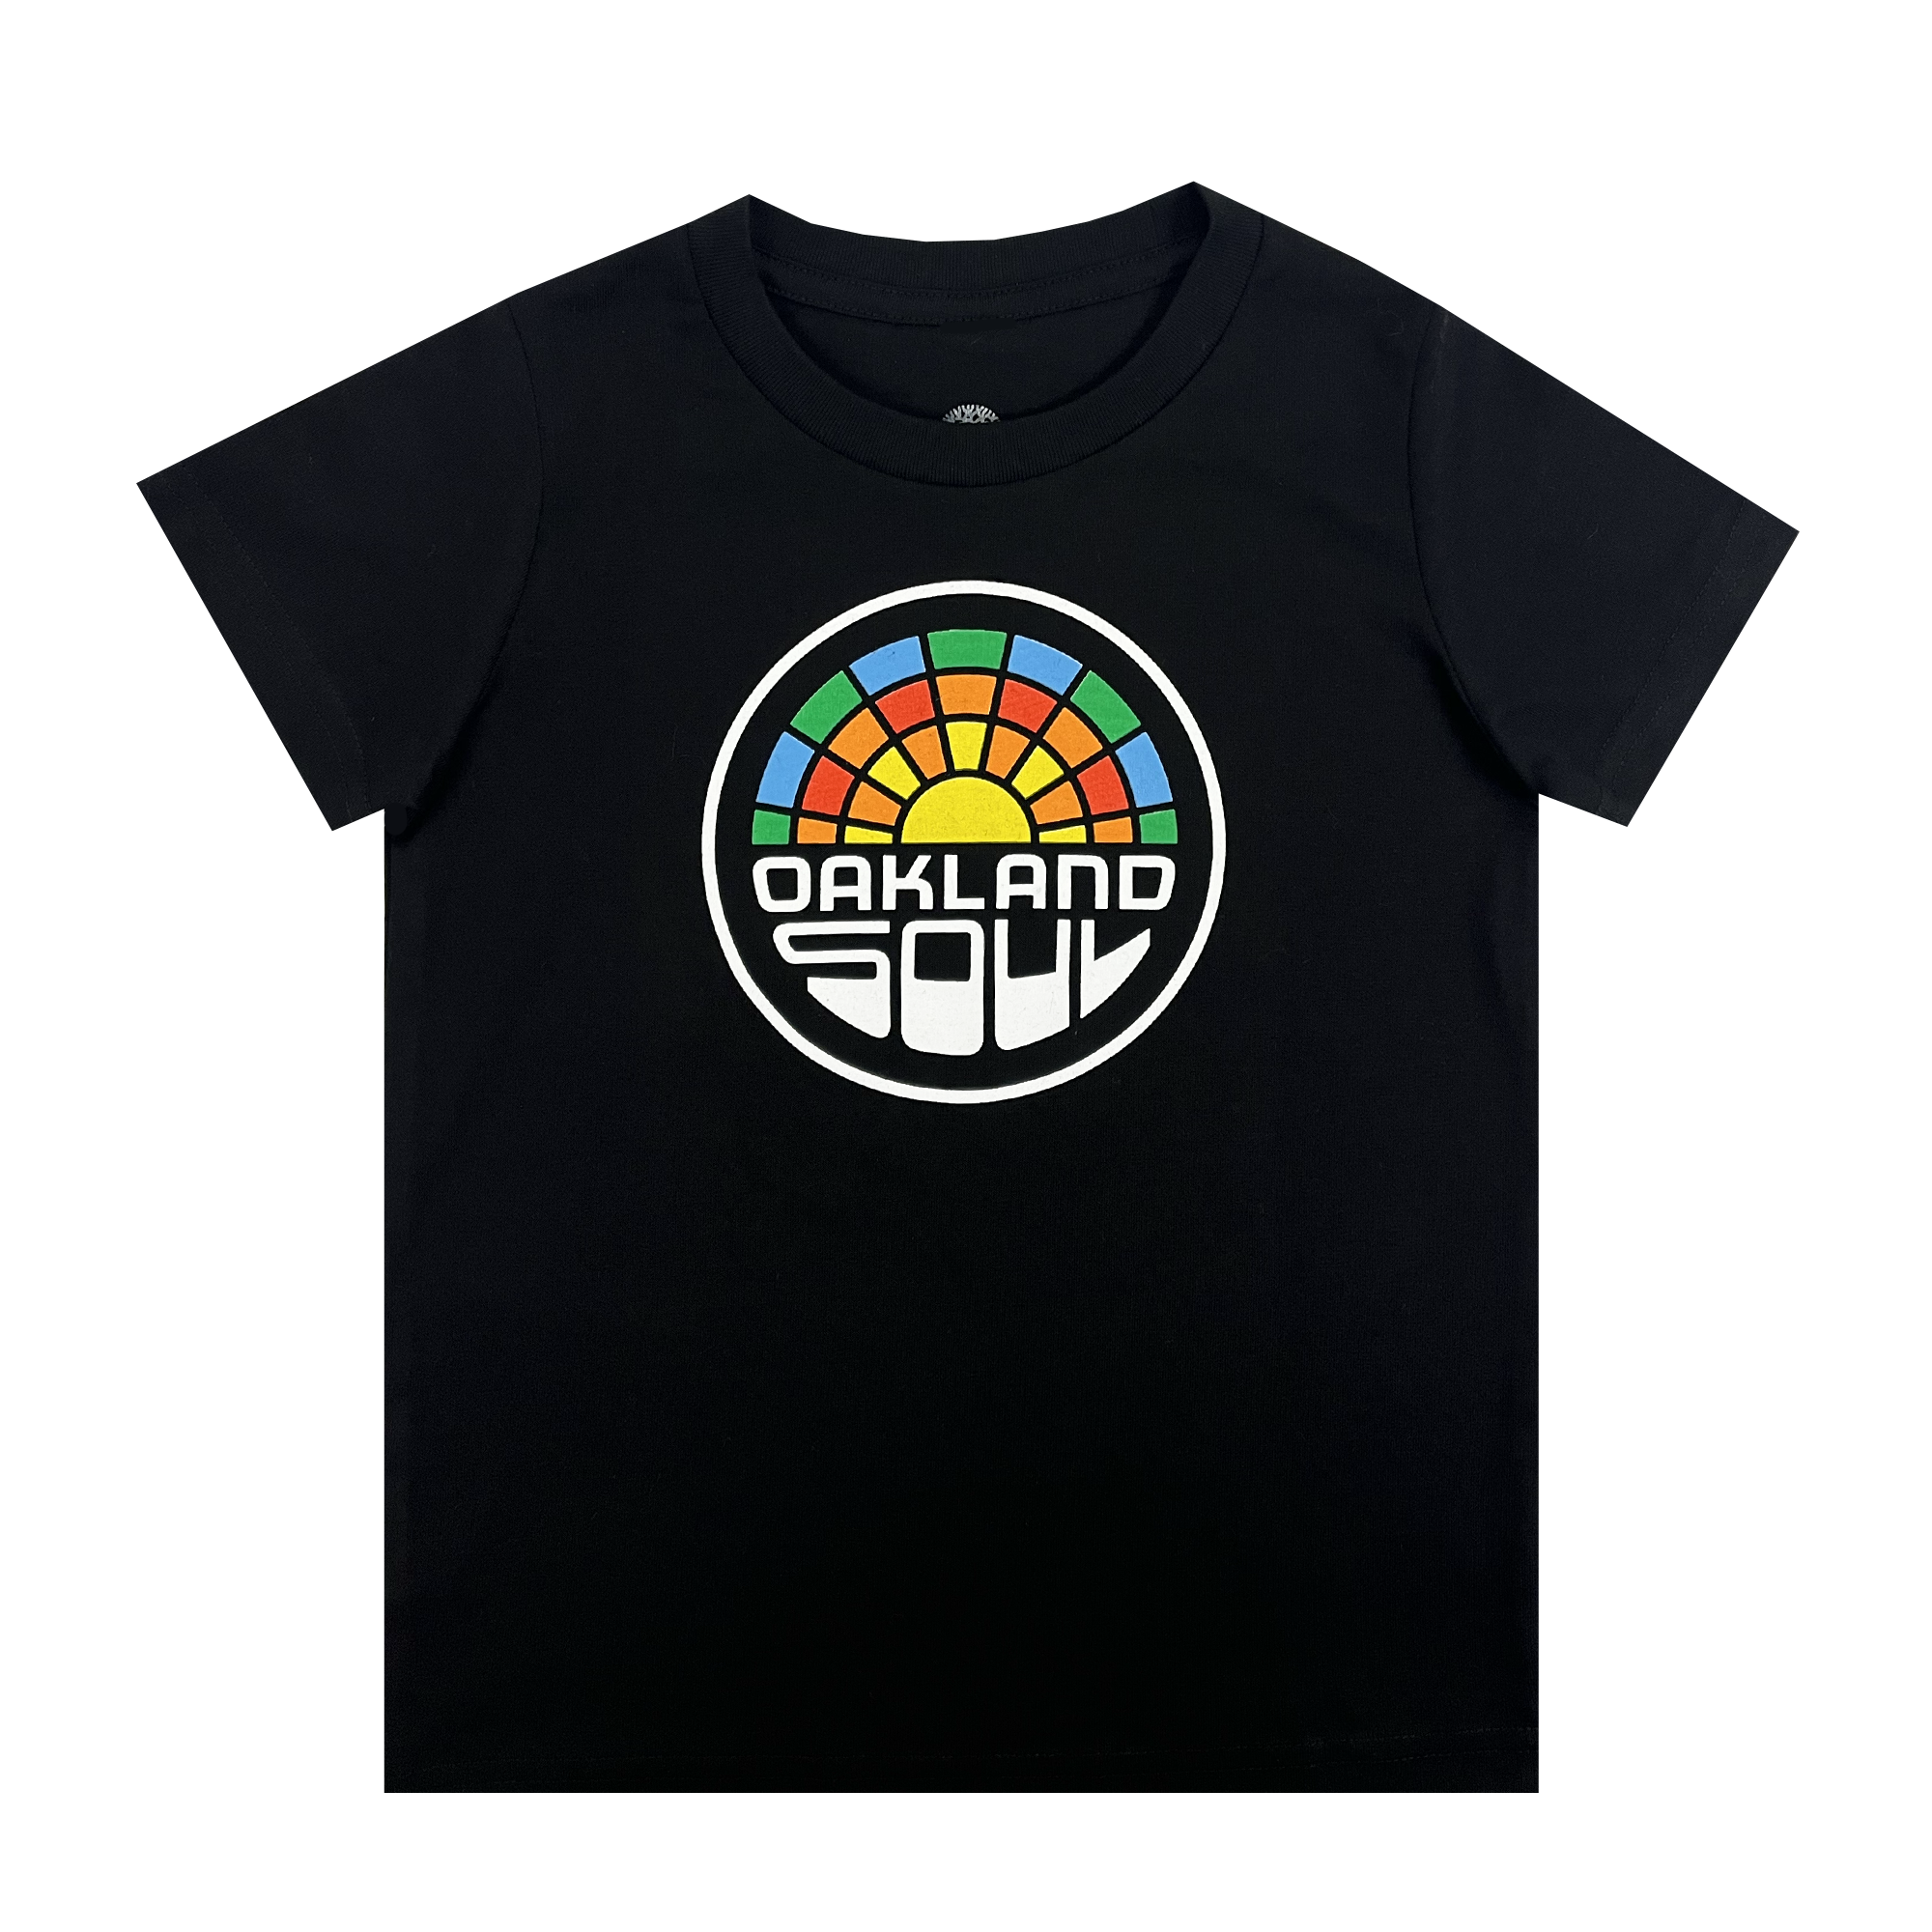 Front view of black toddler's t-shirt with full-color Oakland Soul Women's Soccer Club logo.